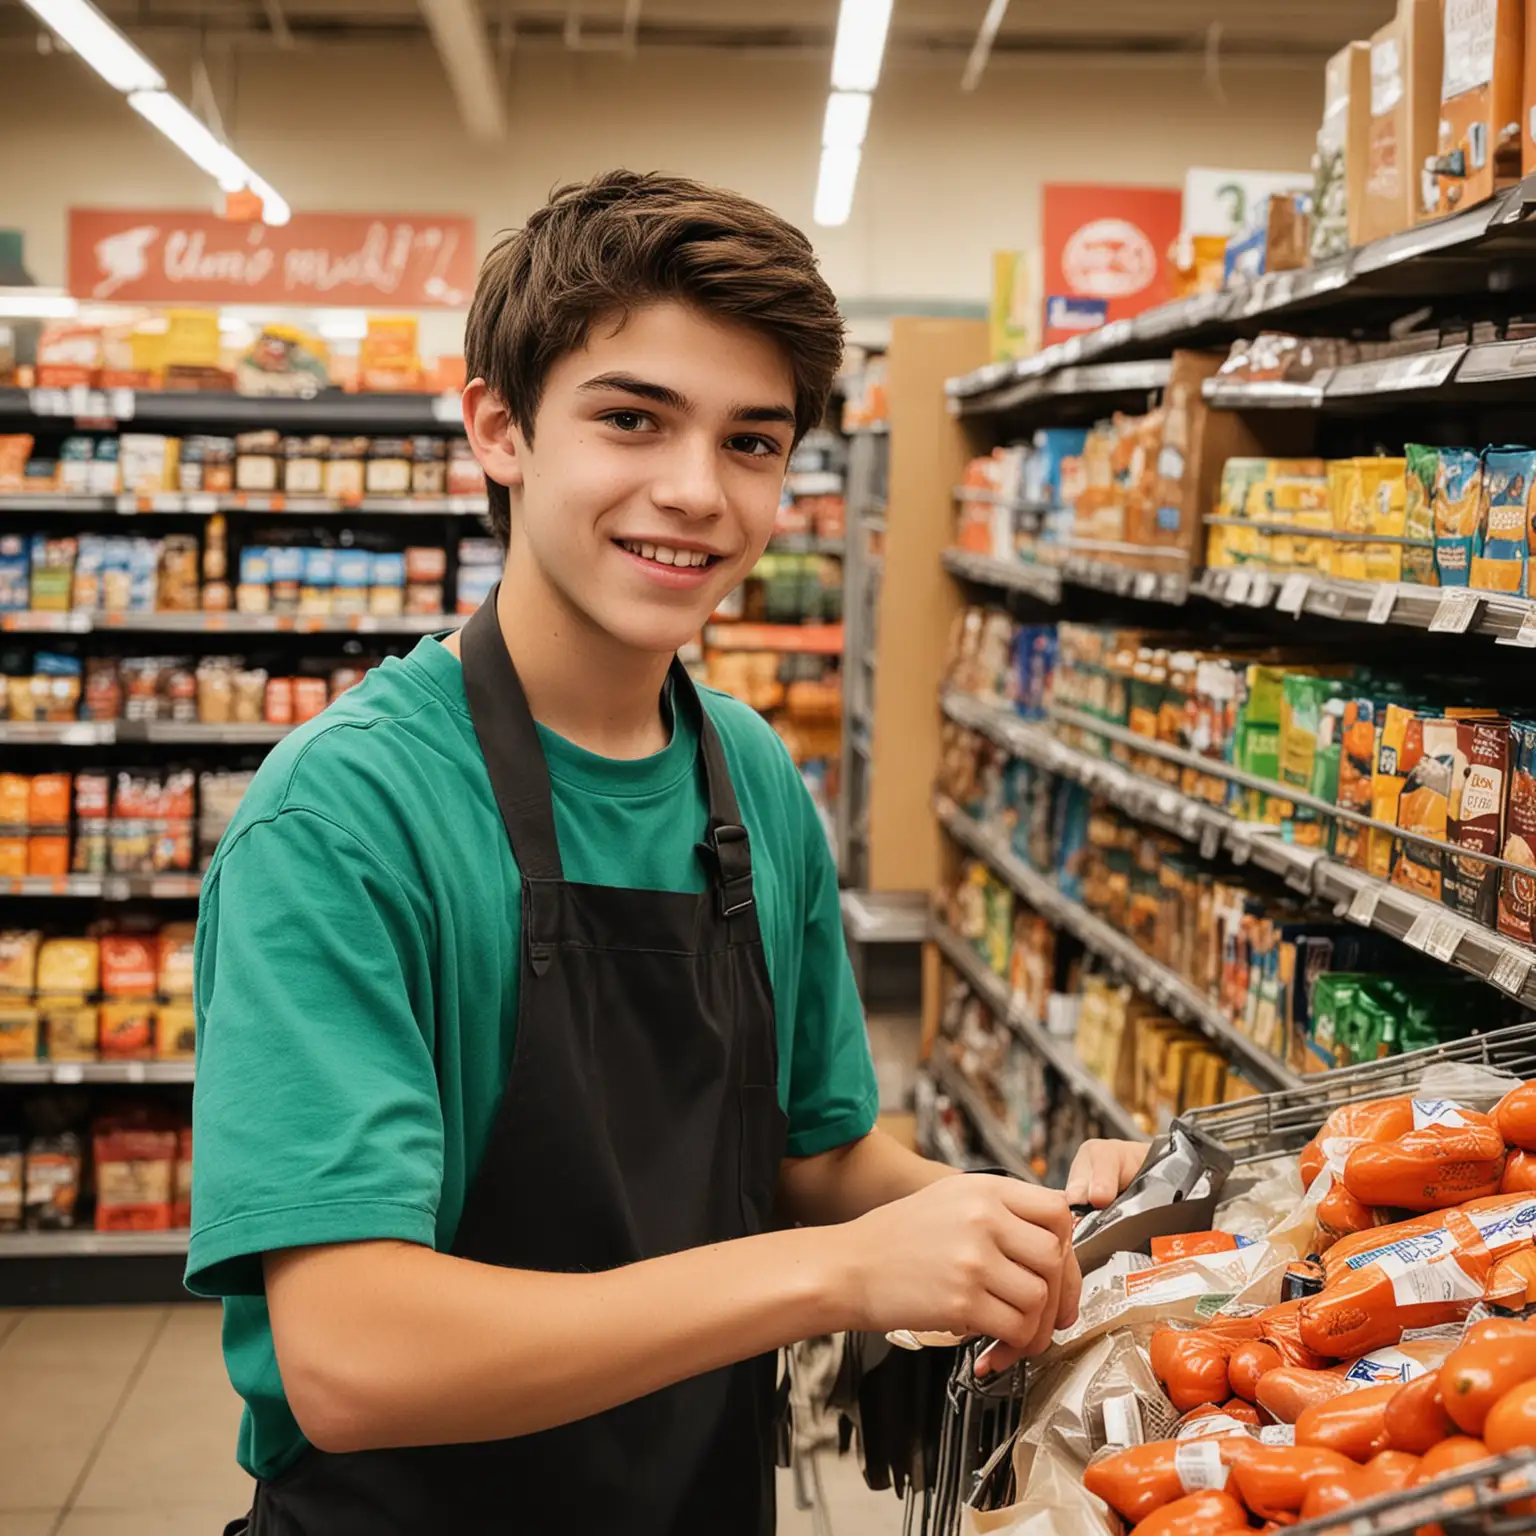 Teen Boy Working at a Grocery Store Busy with Produce